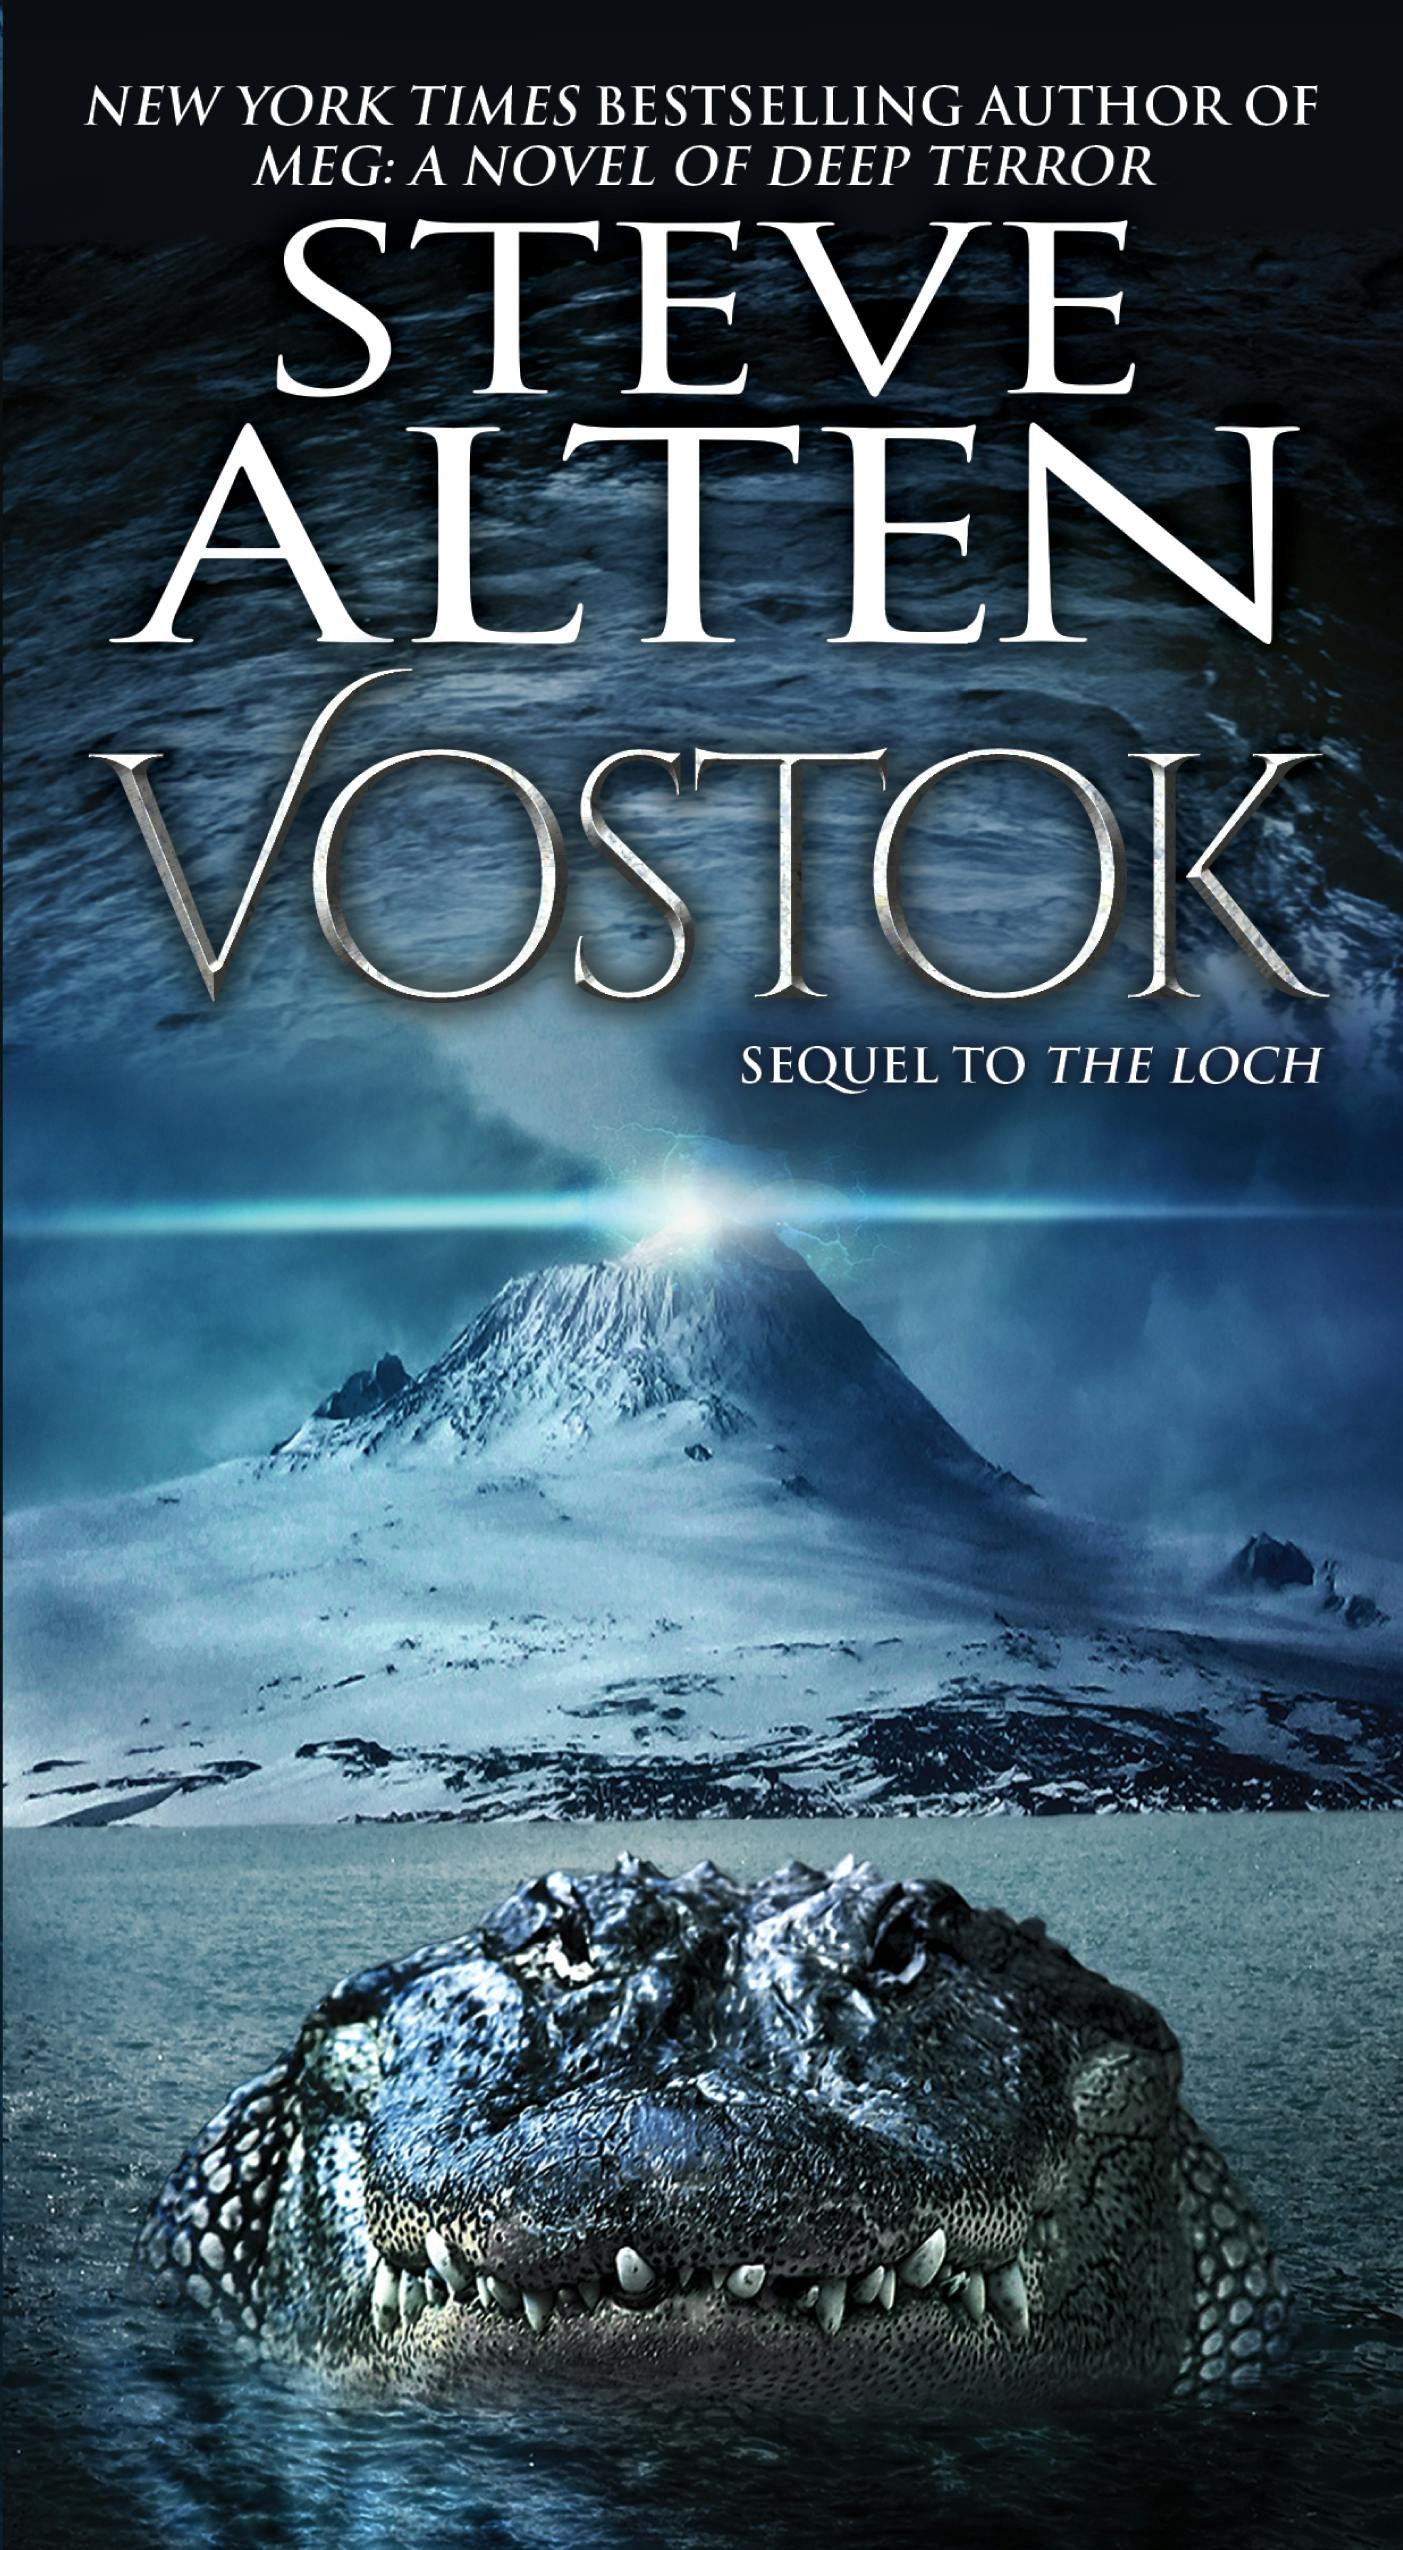 Cover for the book titled as: Vostok